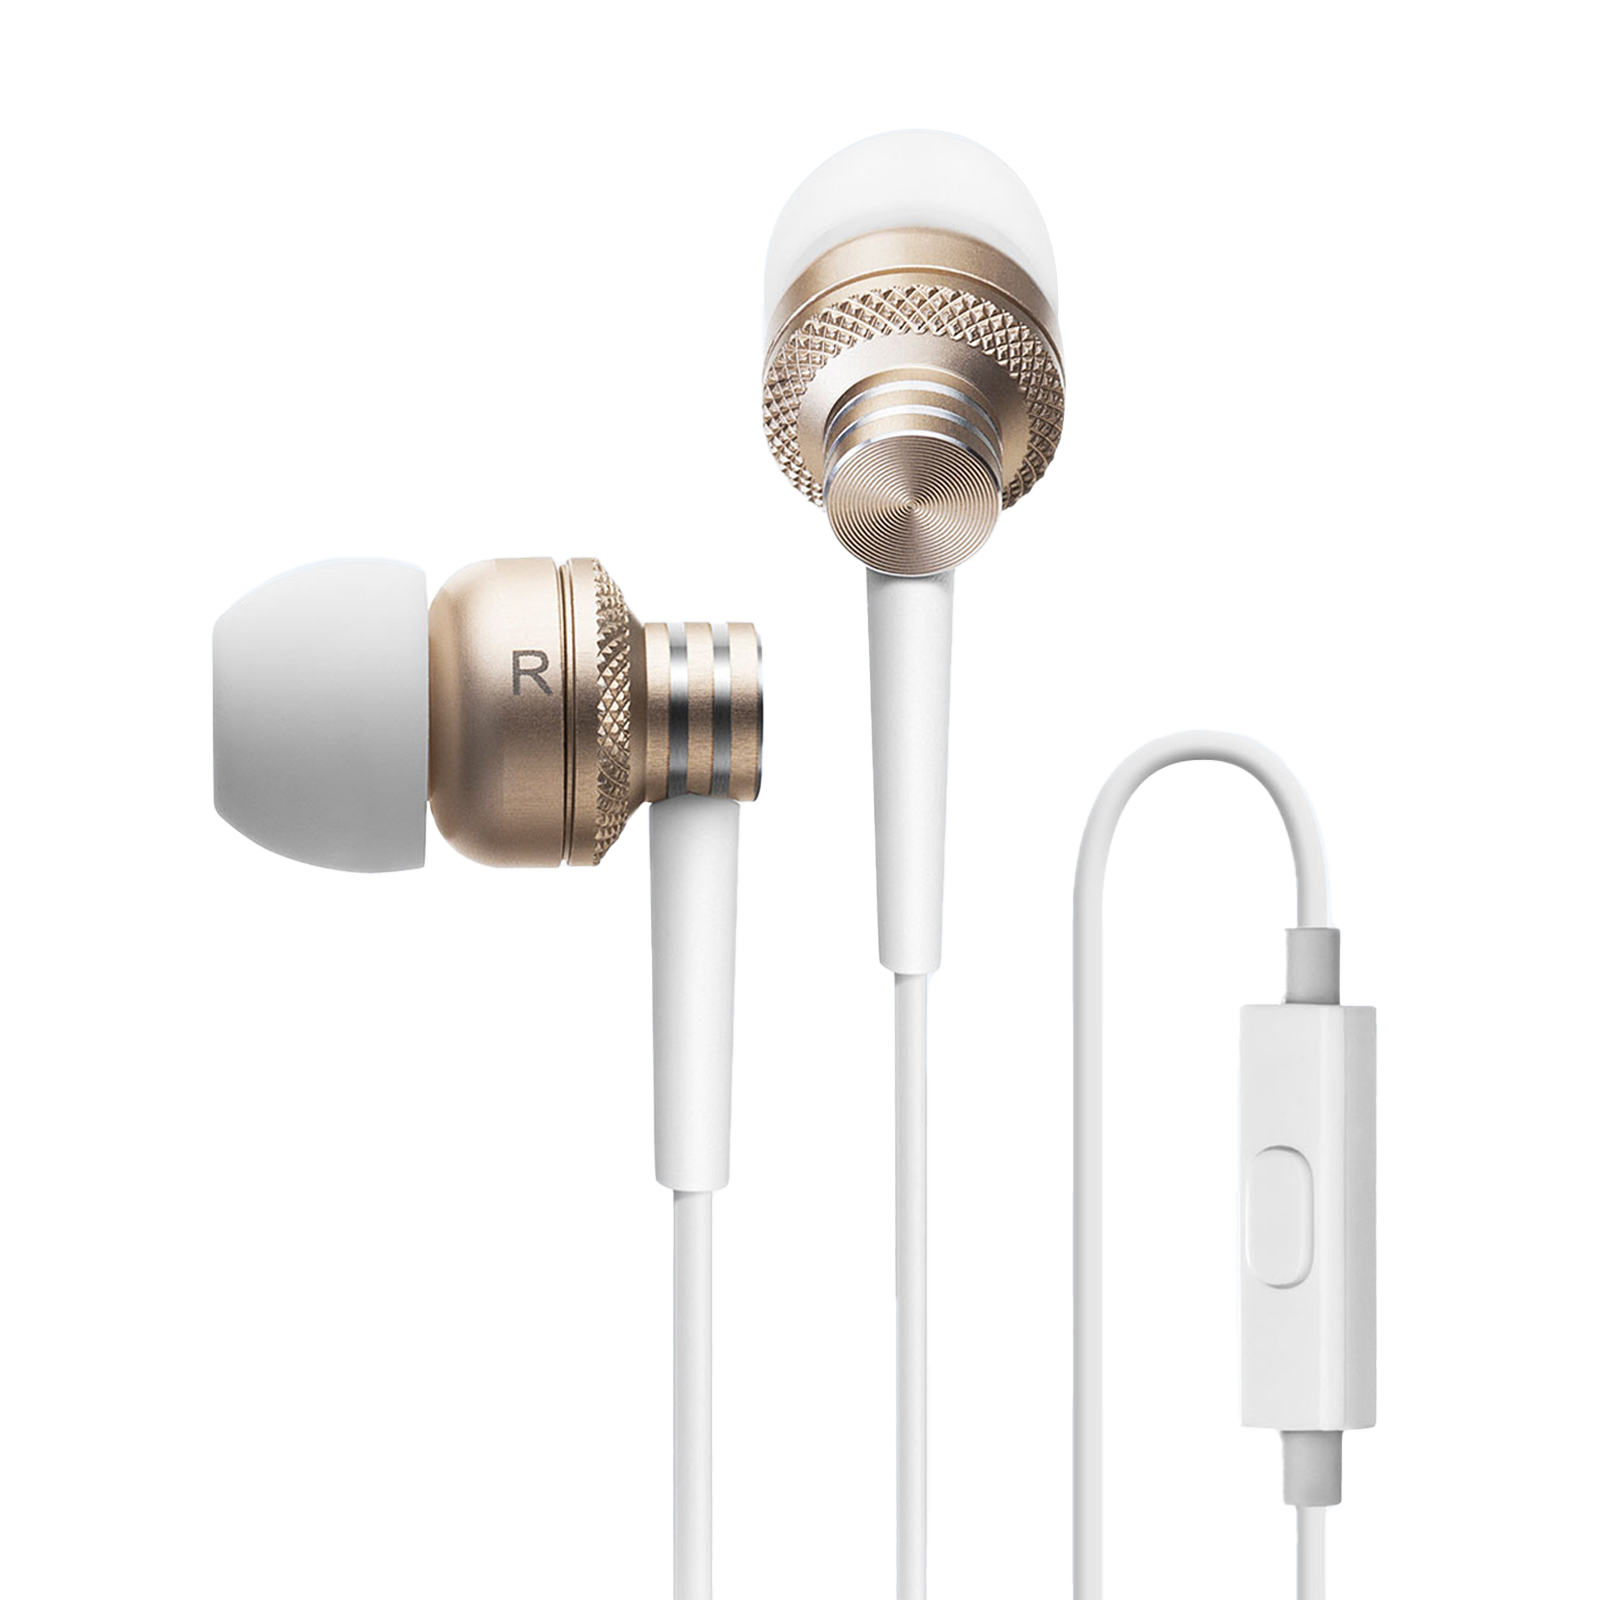 P270 Stylish Hi-Fi earphone effortlessly lets you take calls on the go